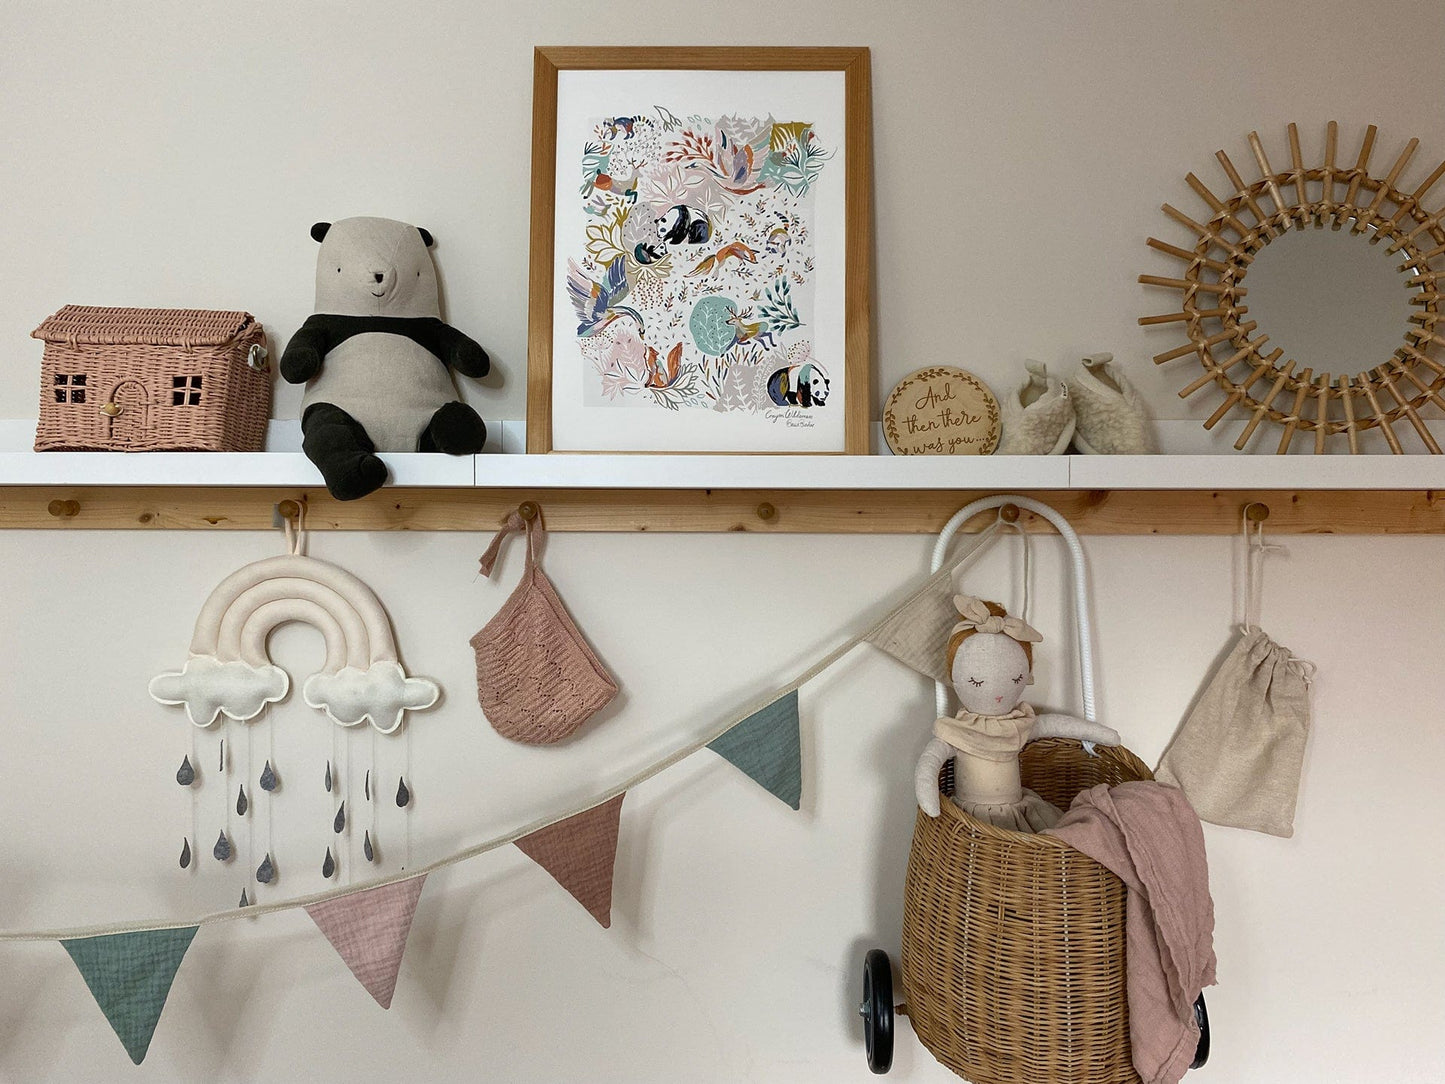 A wooden and white painted shelf in a kids space with hooks on the underside. With bunting, a rainbow mobile, a pink bonnet and a Olli Ella luggy with a doll, all in muted tones, underneath. On the shelf sit an Olli Ella Casa Clutch, a soft panda, a framed Crayon Wilderness art print, booties and a rattan framed mirror.